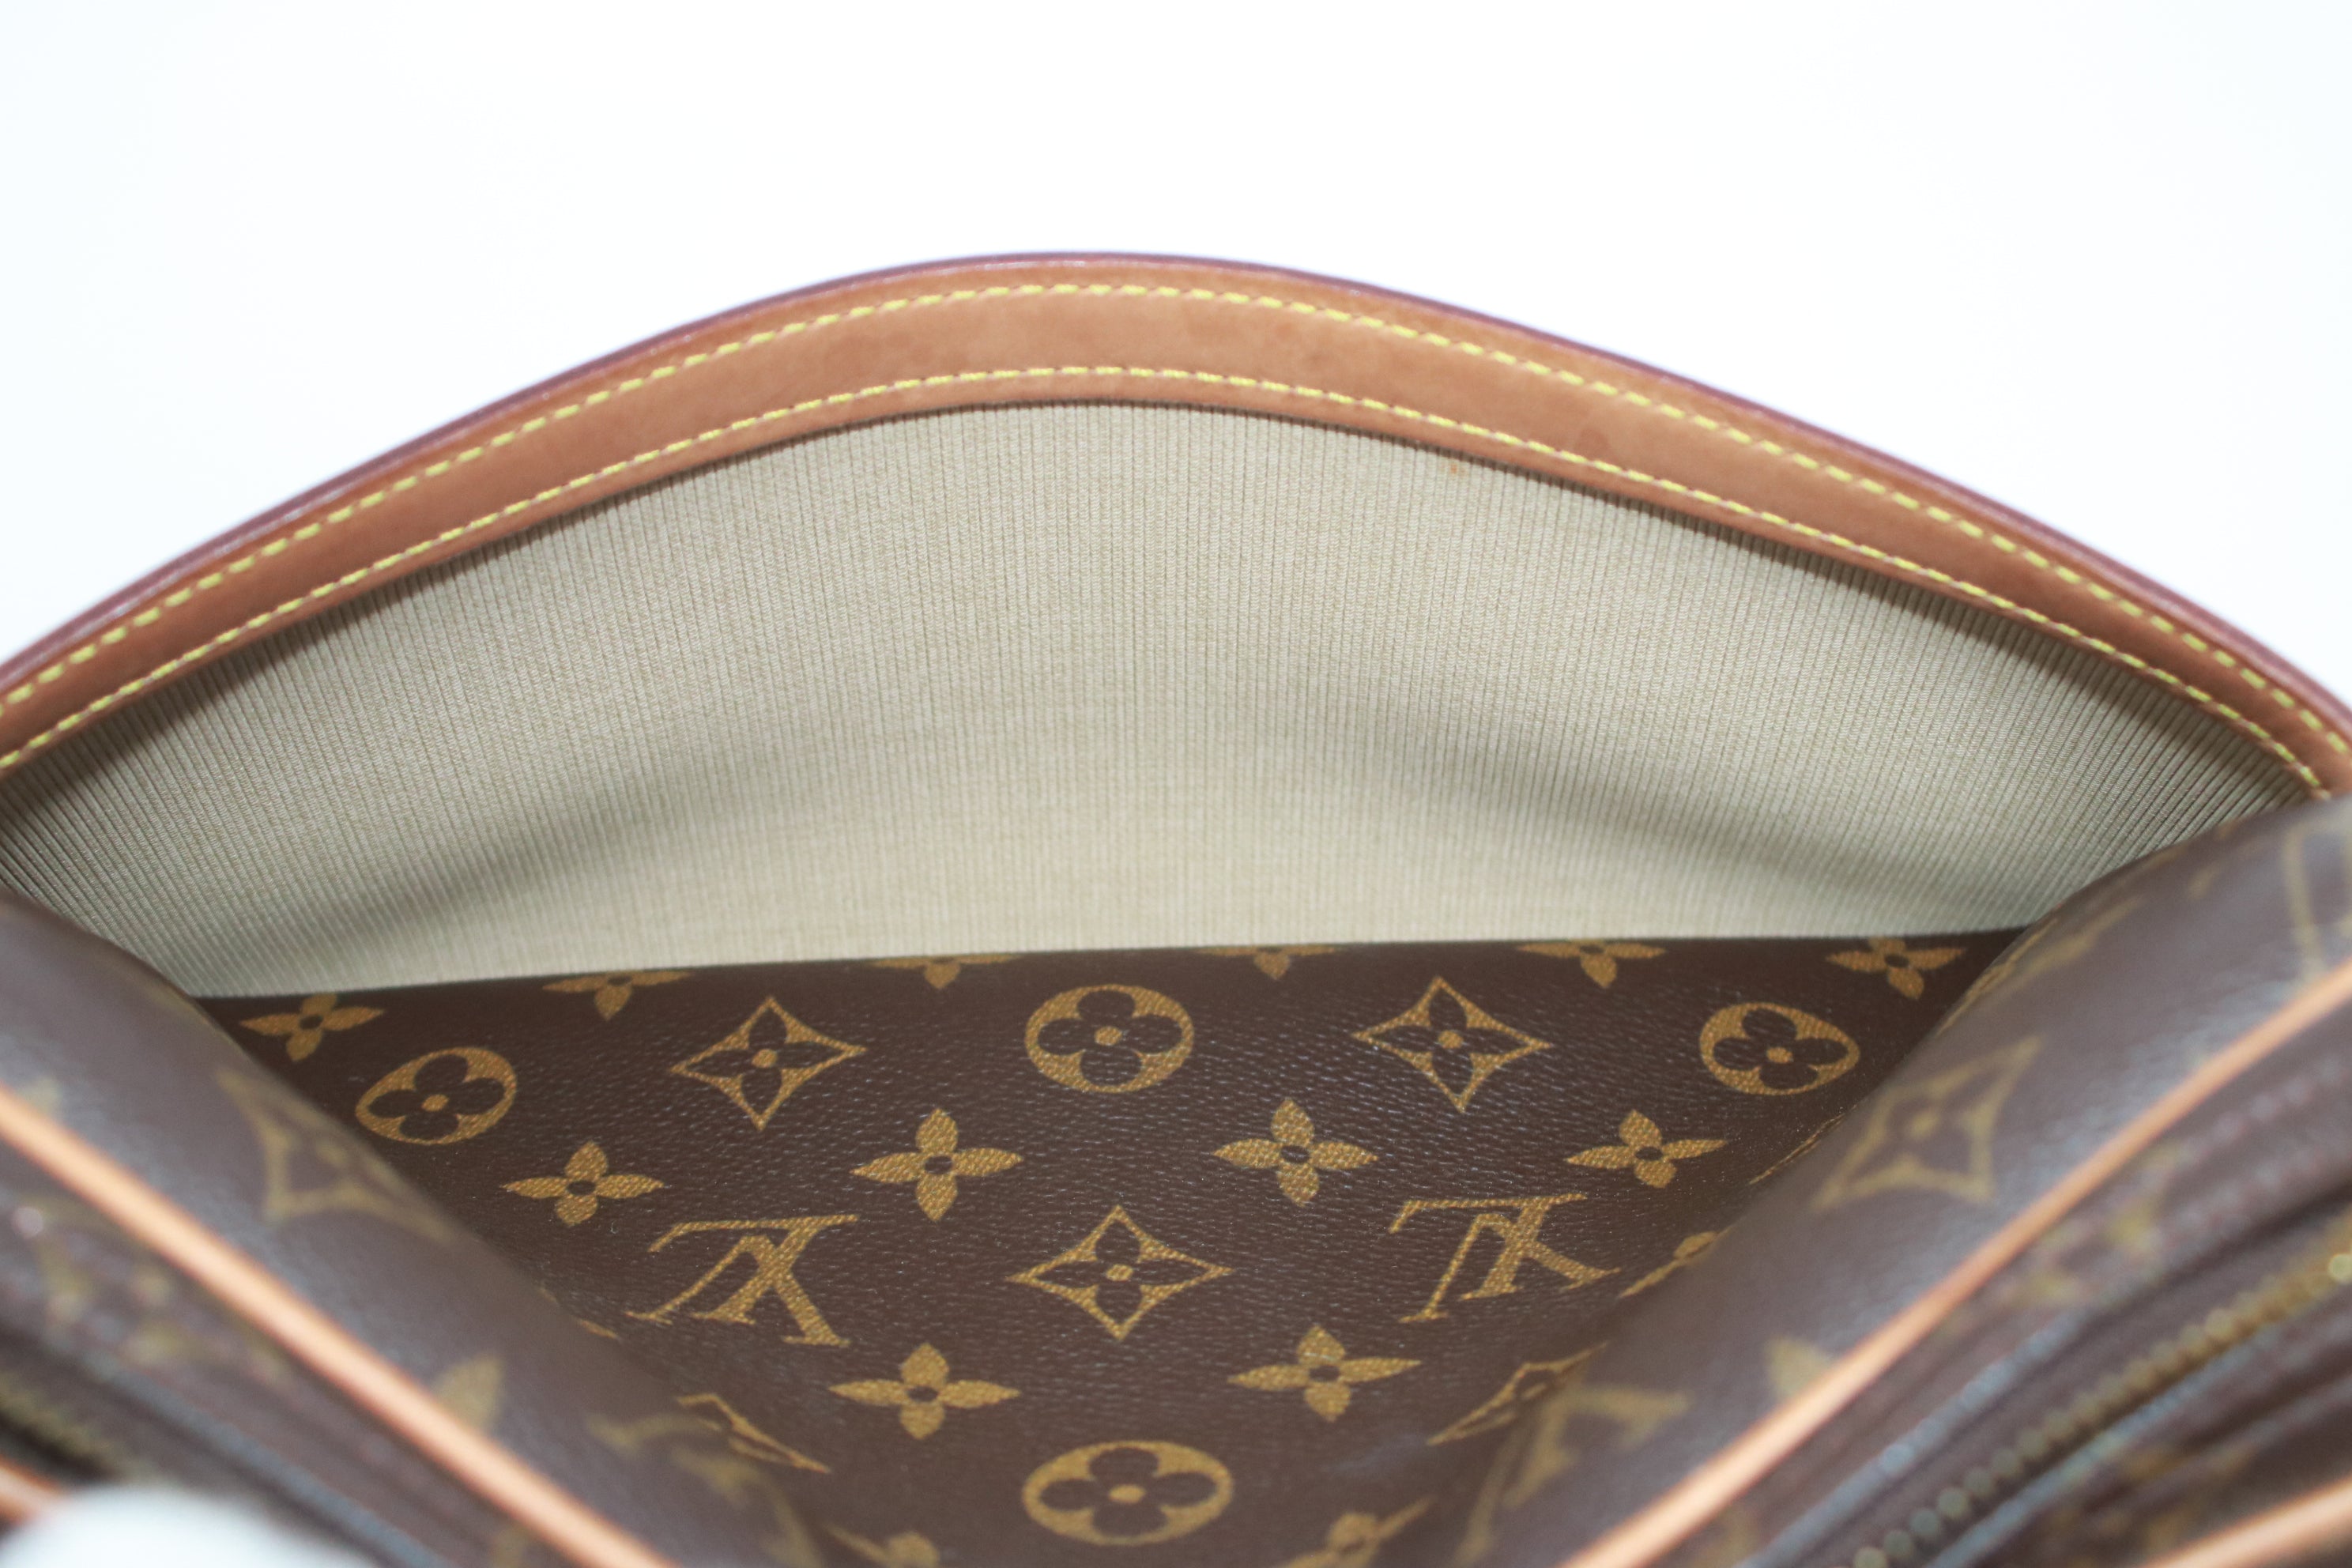 Louis Vuitton Reporter PM Messenger Bag Used (7213)